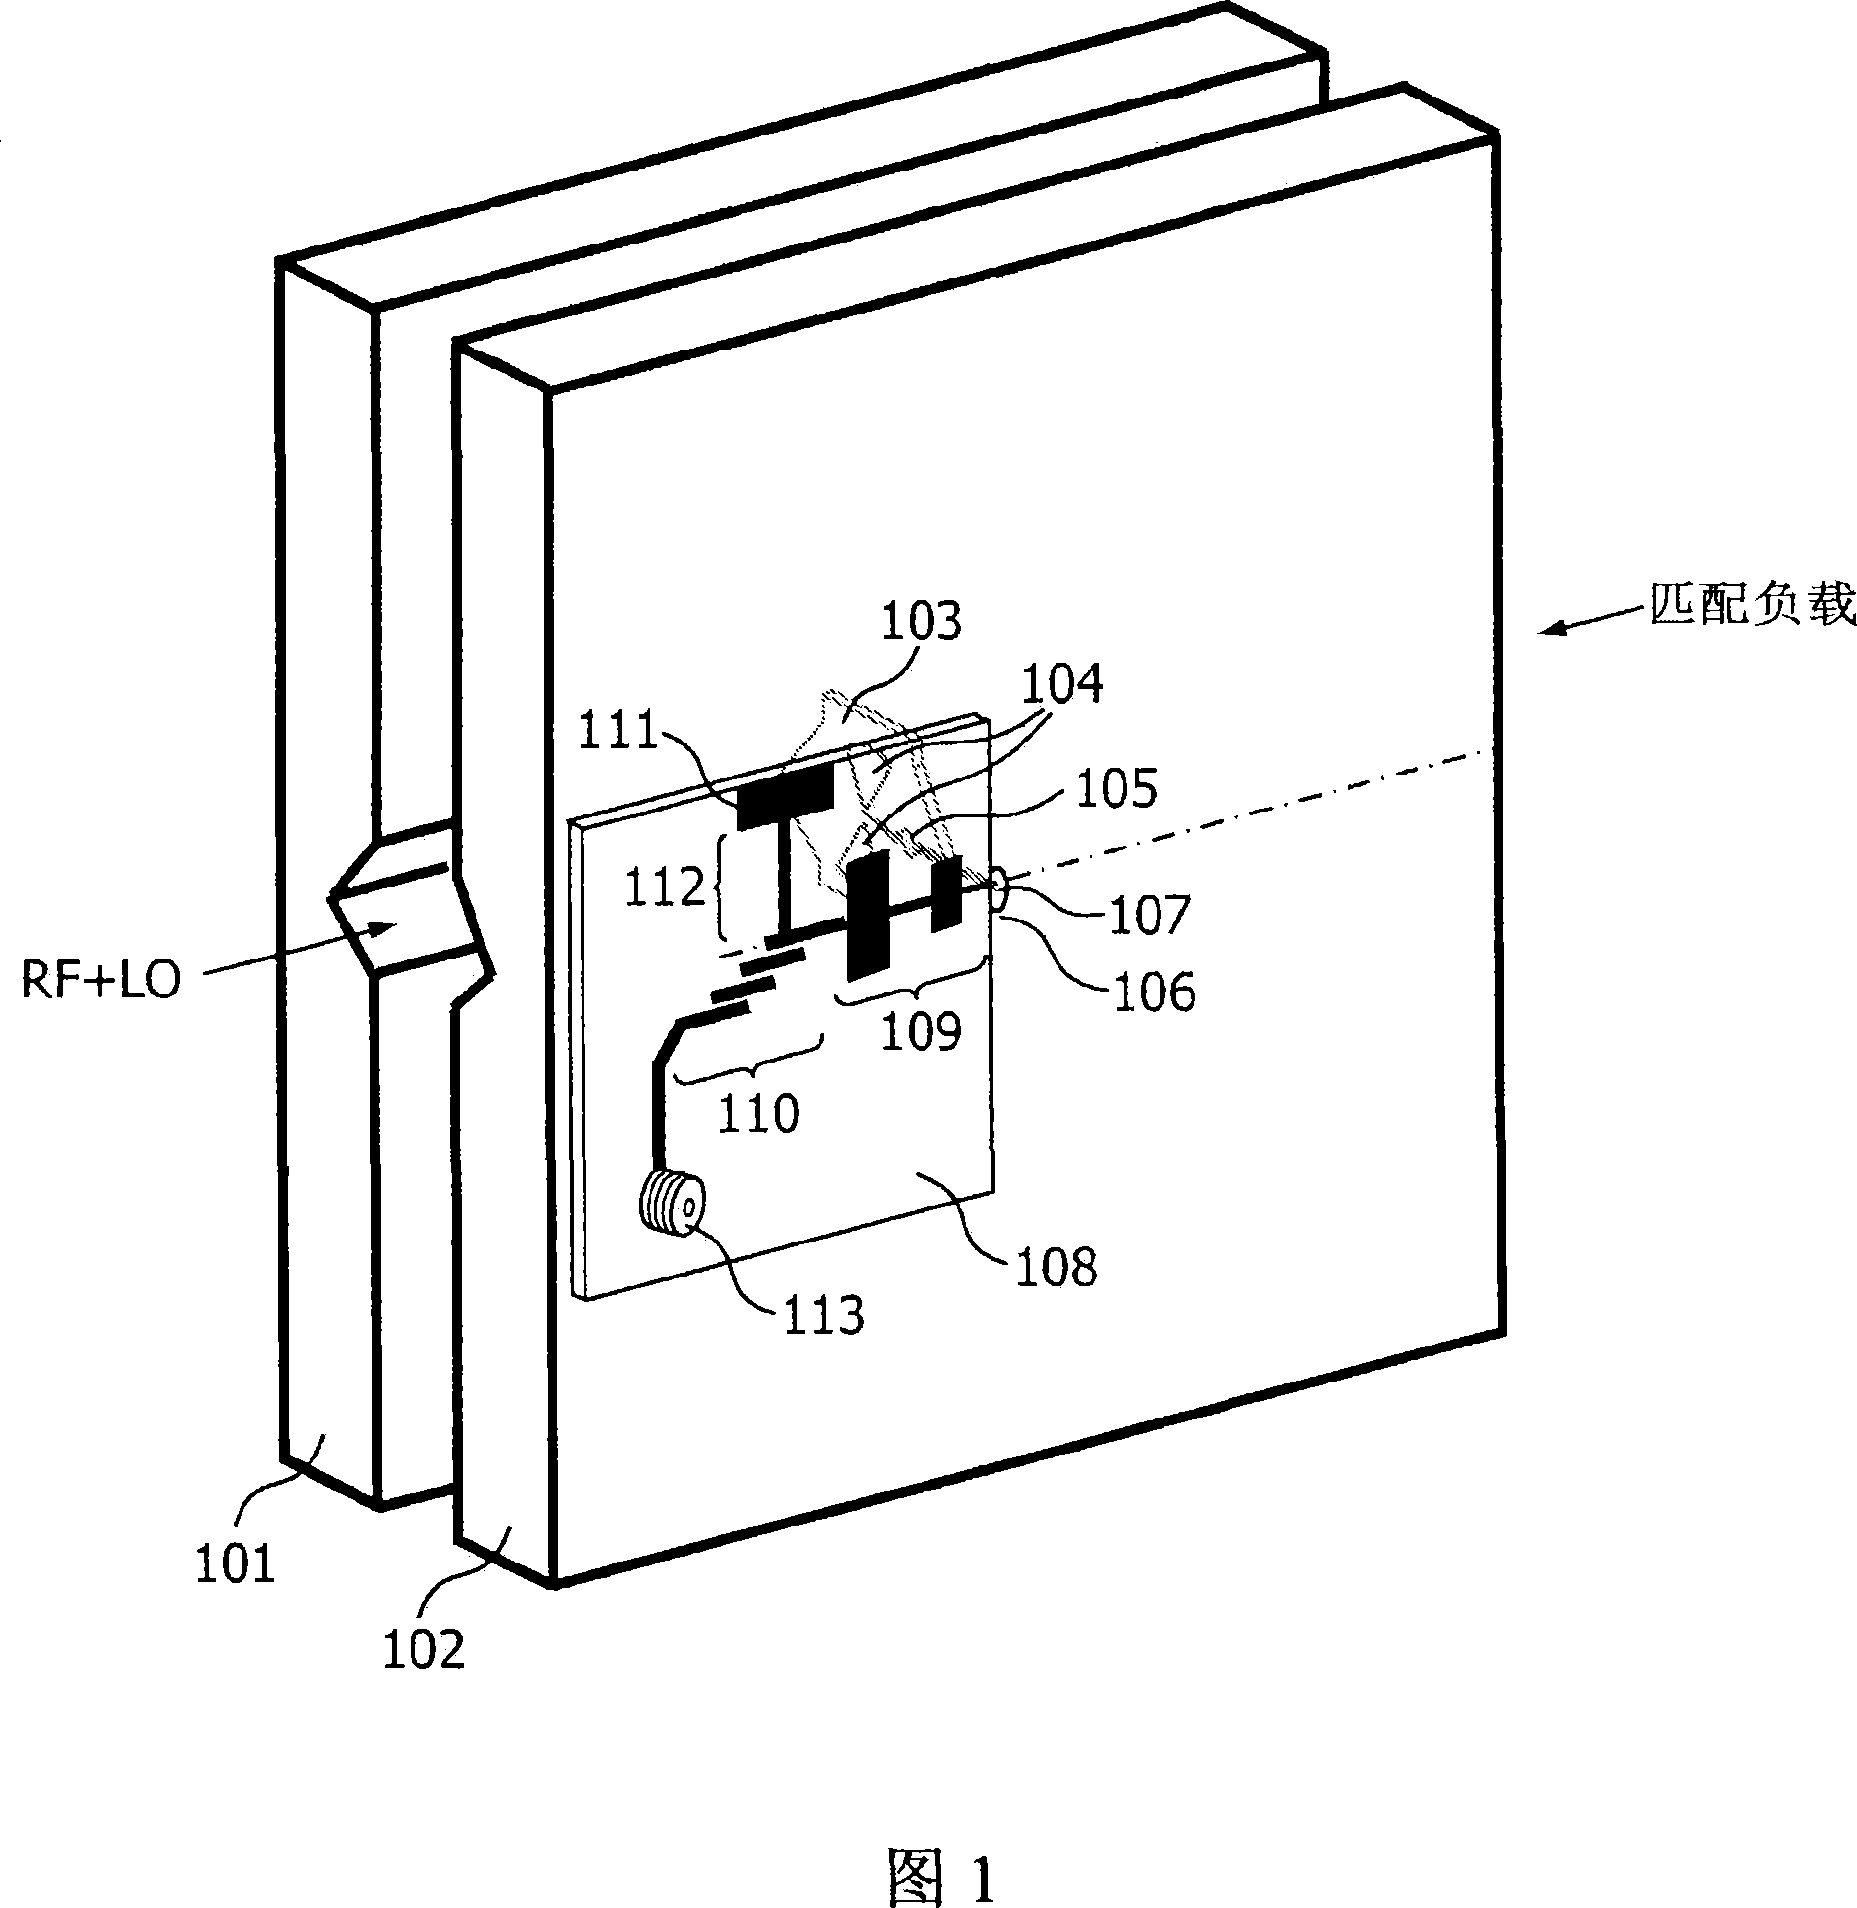 High-frequency electromagnetic wave receiver and broadband waveguide mixer